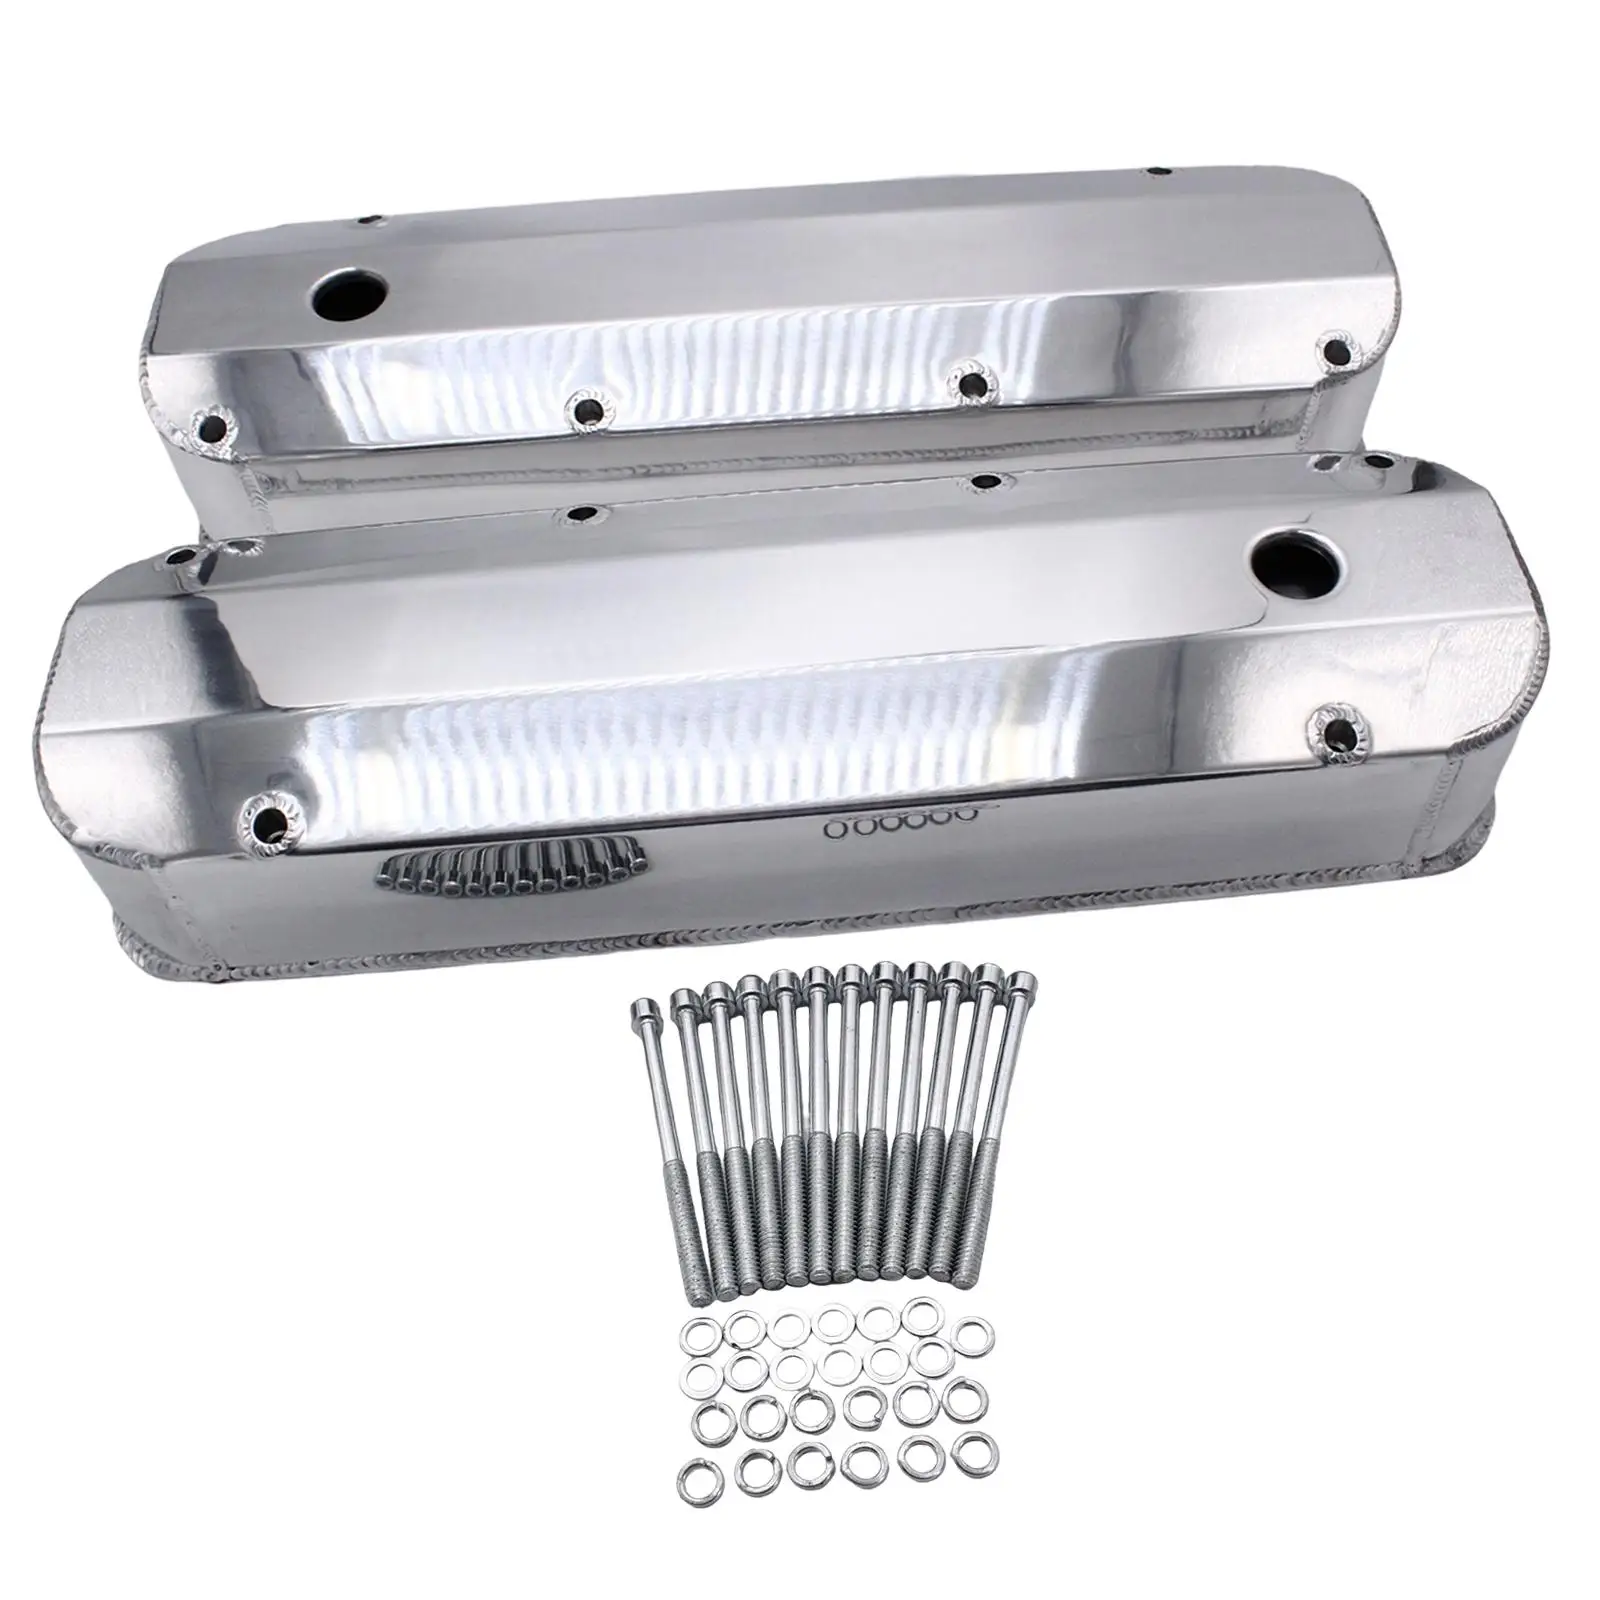 Aluminum Valve Covers Replace Parts for Ford Big Block 429 460 Durable